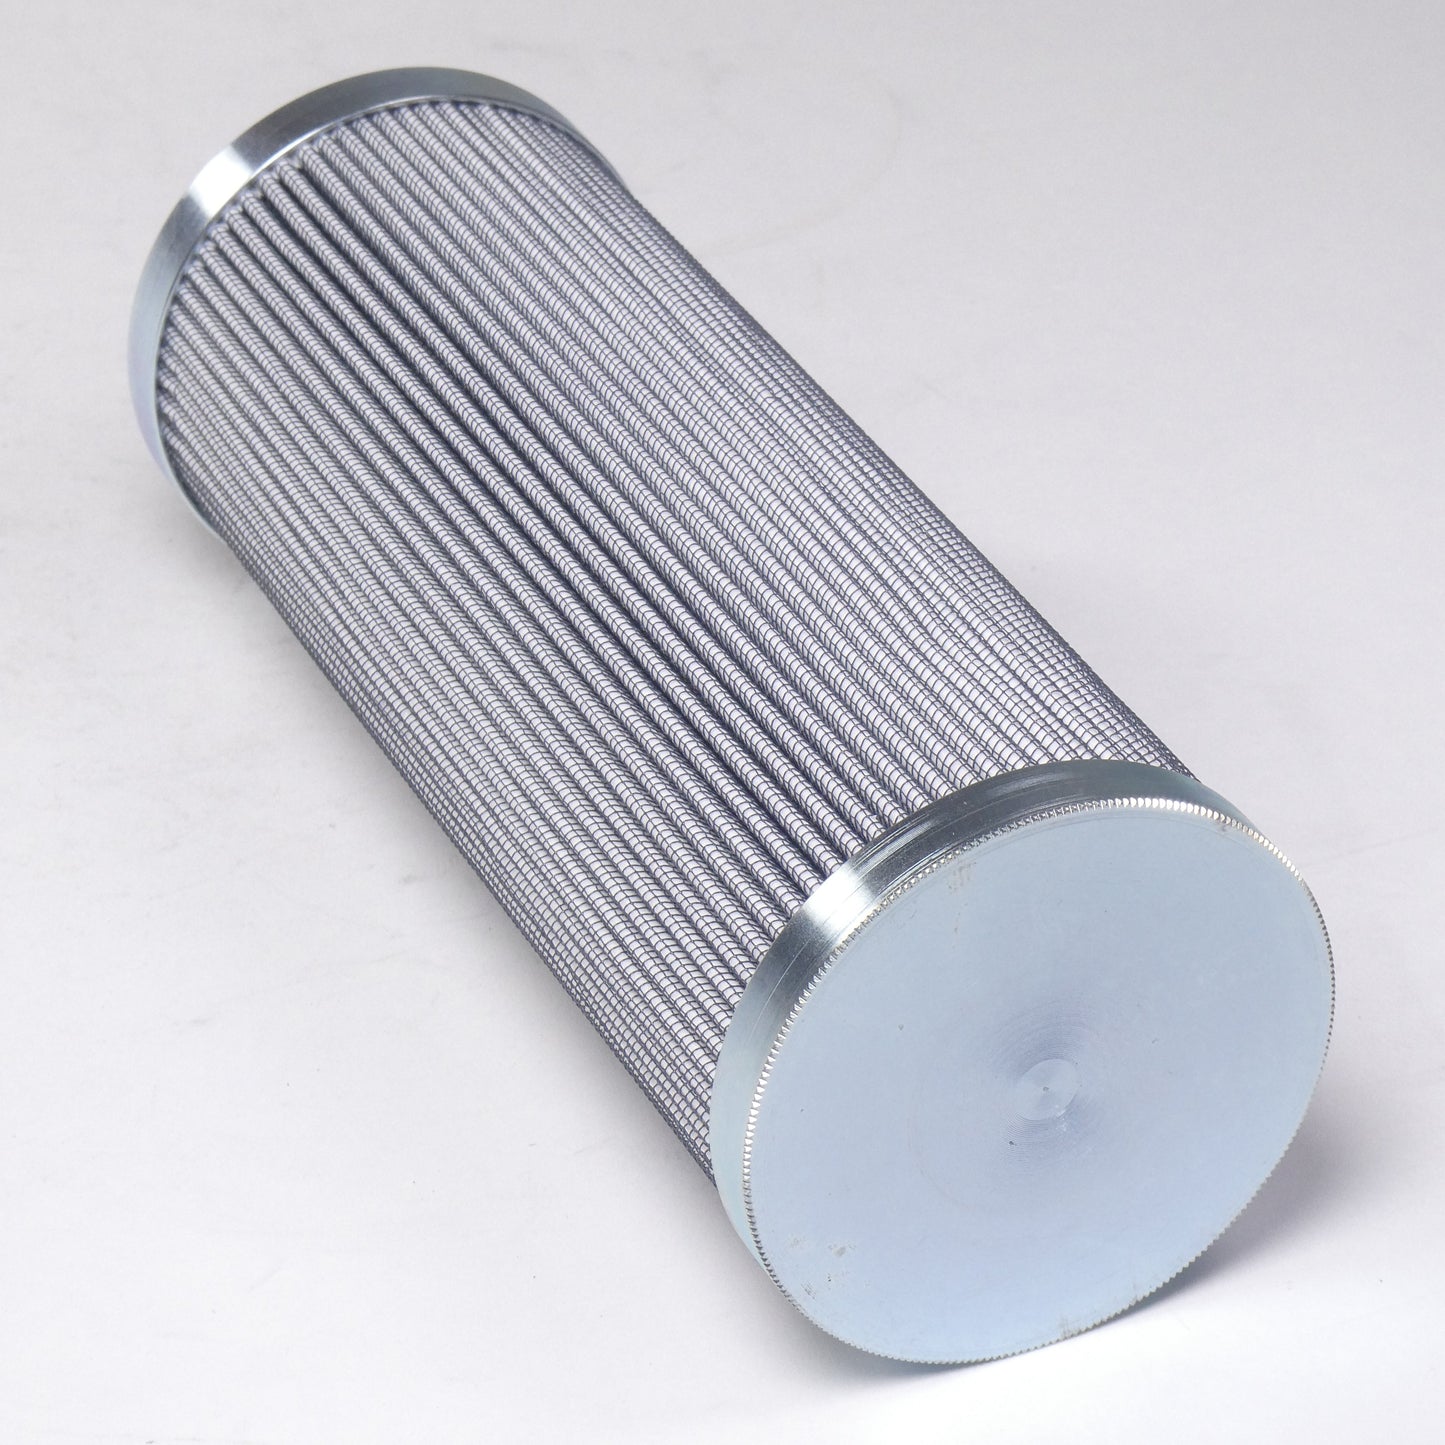 Hydrafil Replacement Filter Element for Pall AC9601FAT8Z